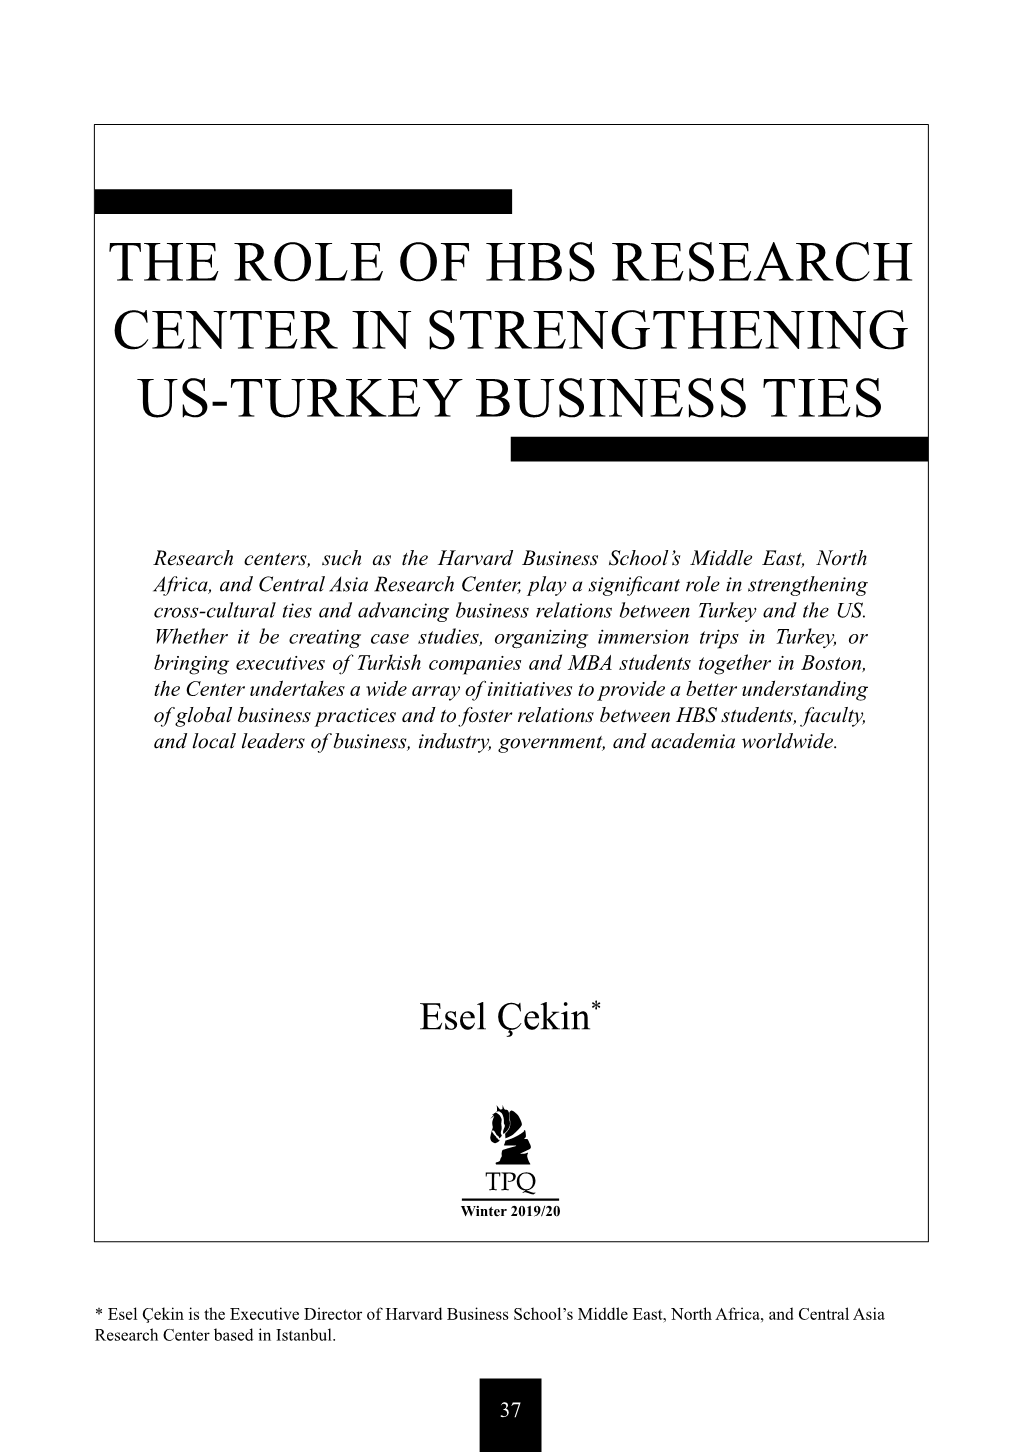 The Role of Hbs Research Center in Strengthening Us-Turkey Business Ties